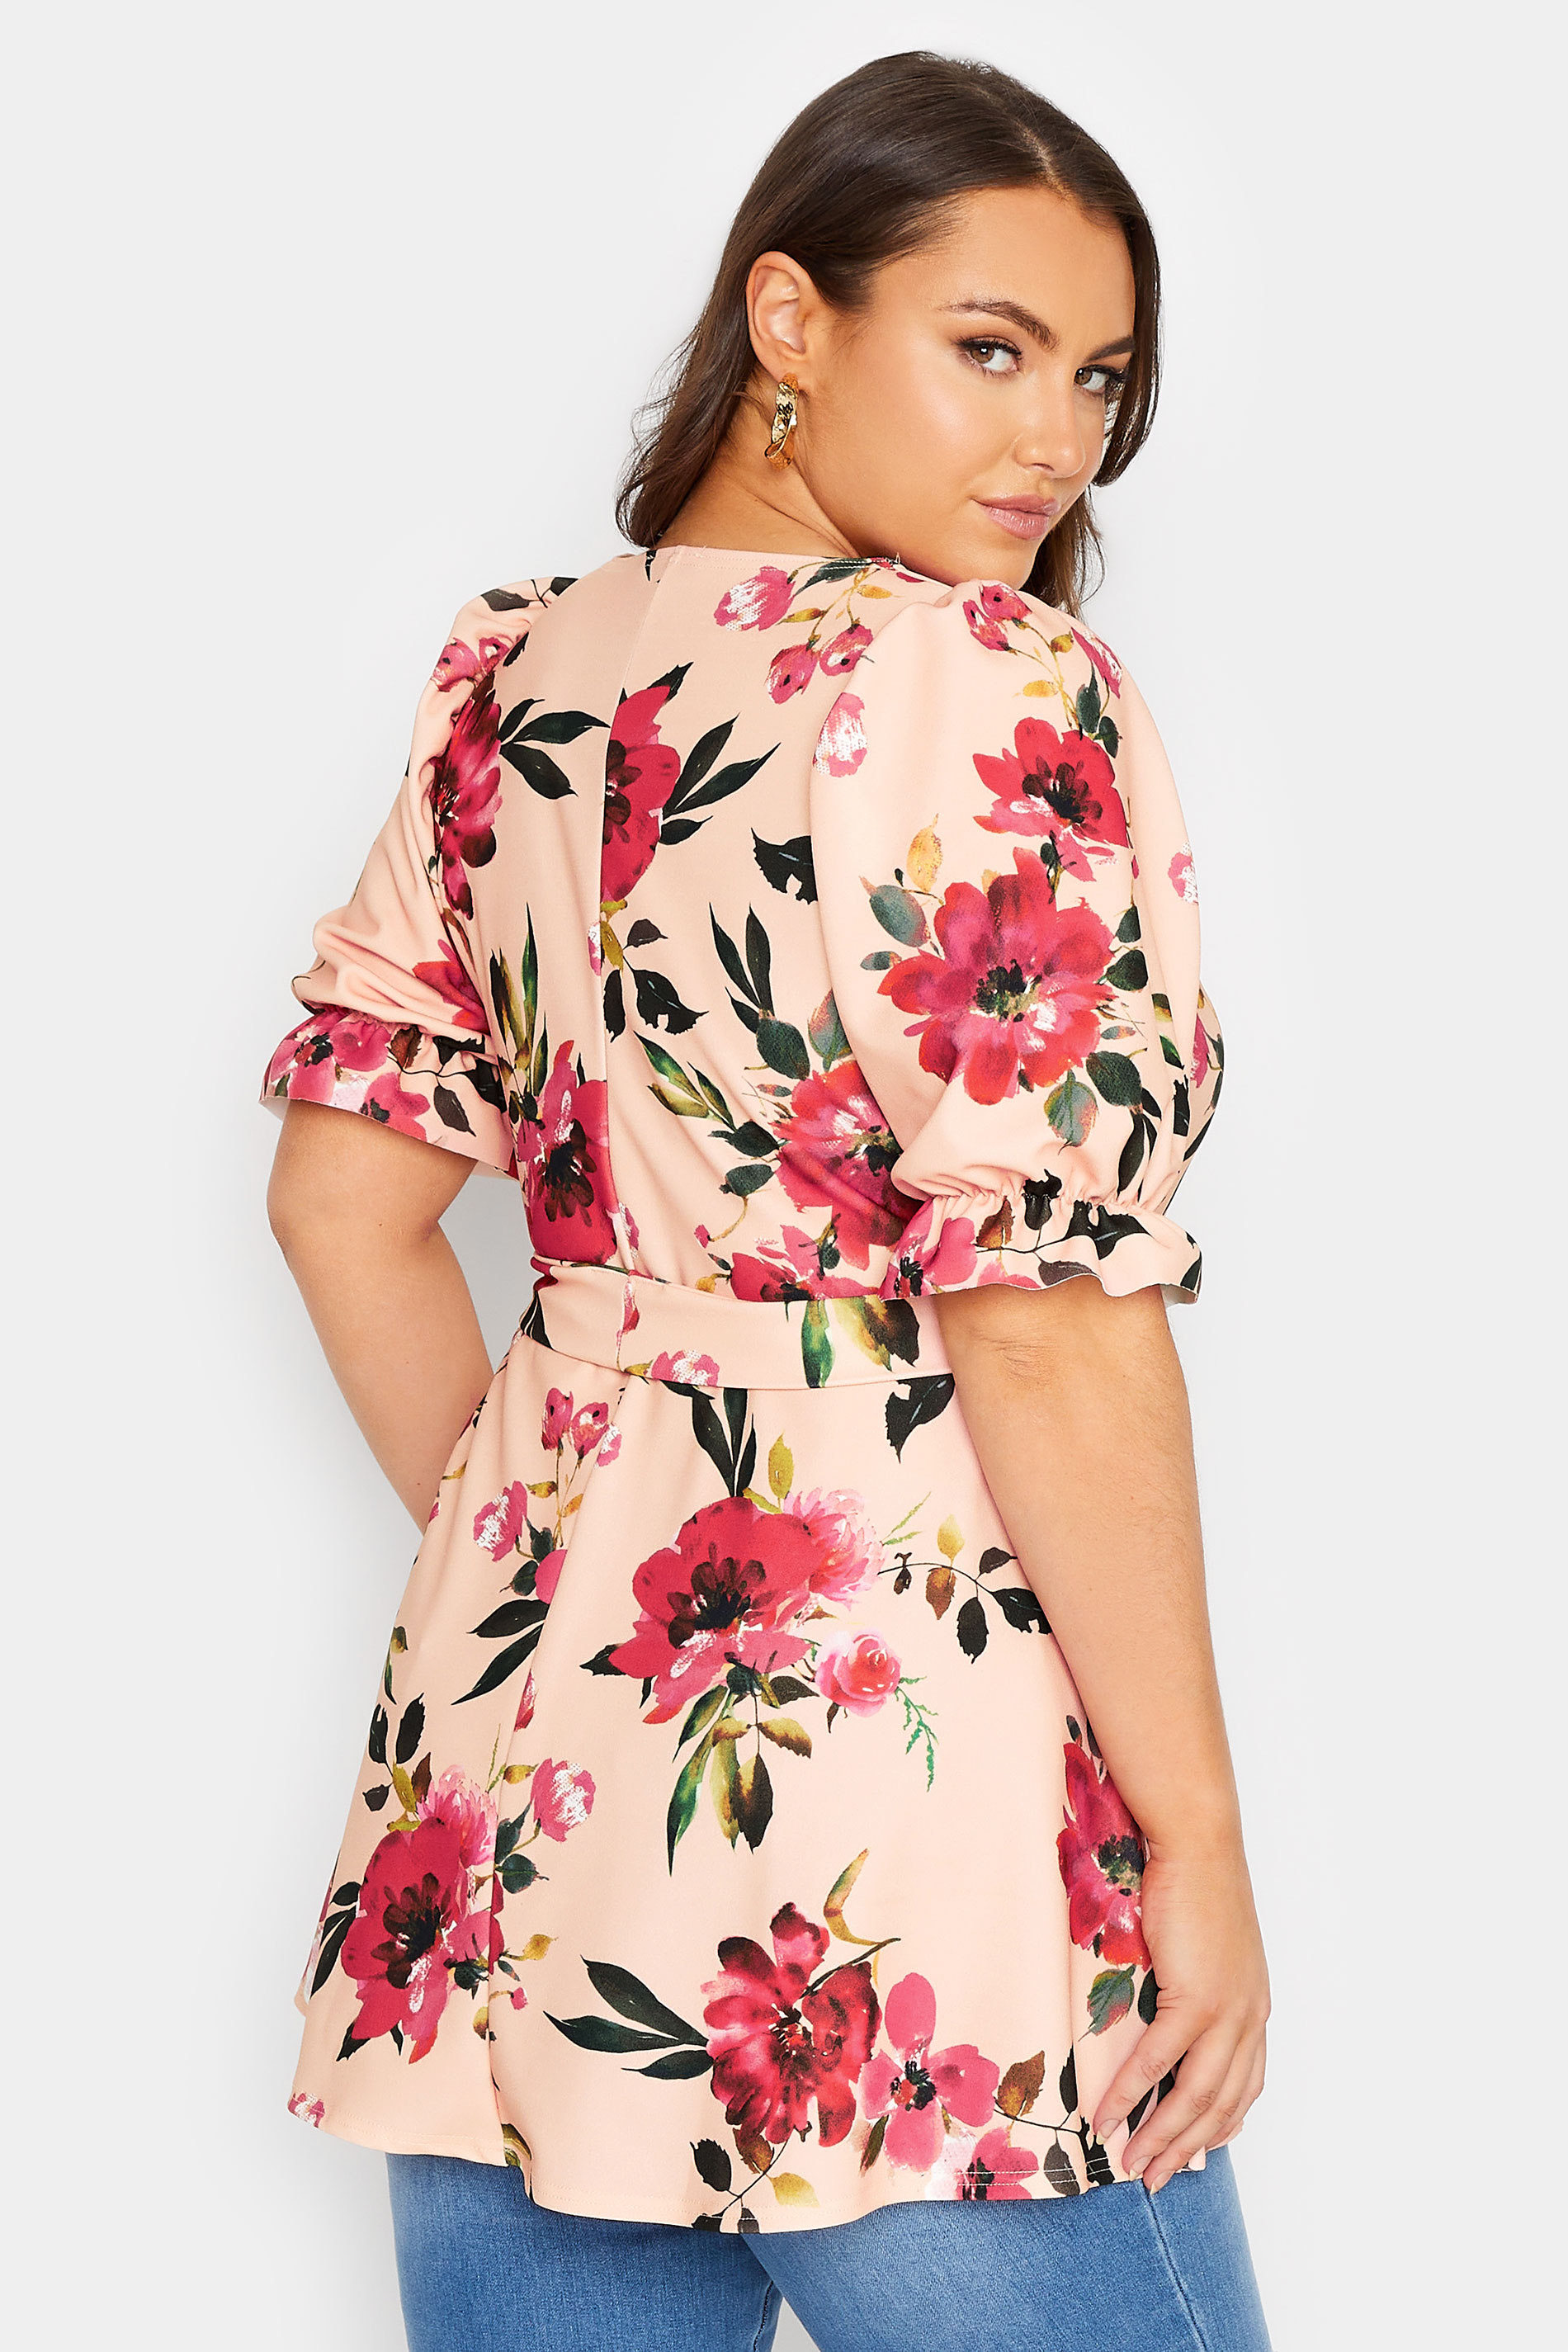 YOURS LONDON Plus Size Light Pink Floral Print Peplum Top | Yours Clothing  3